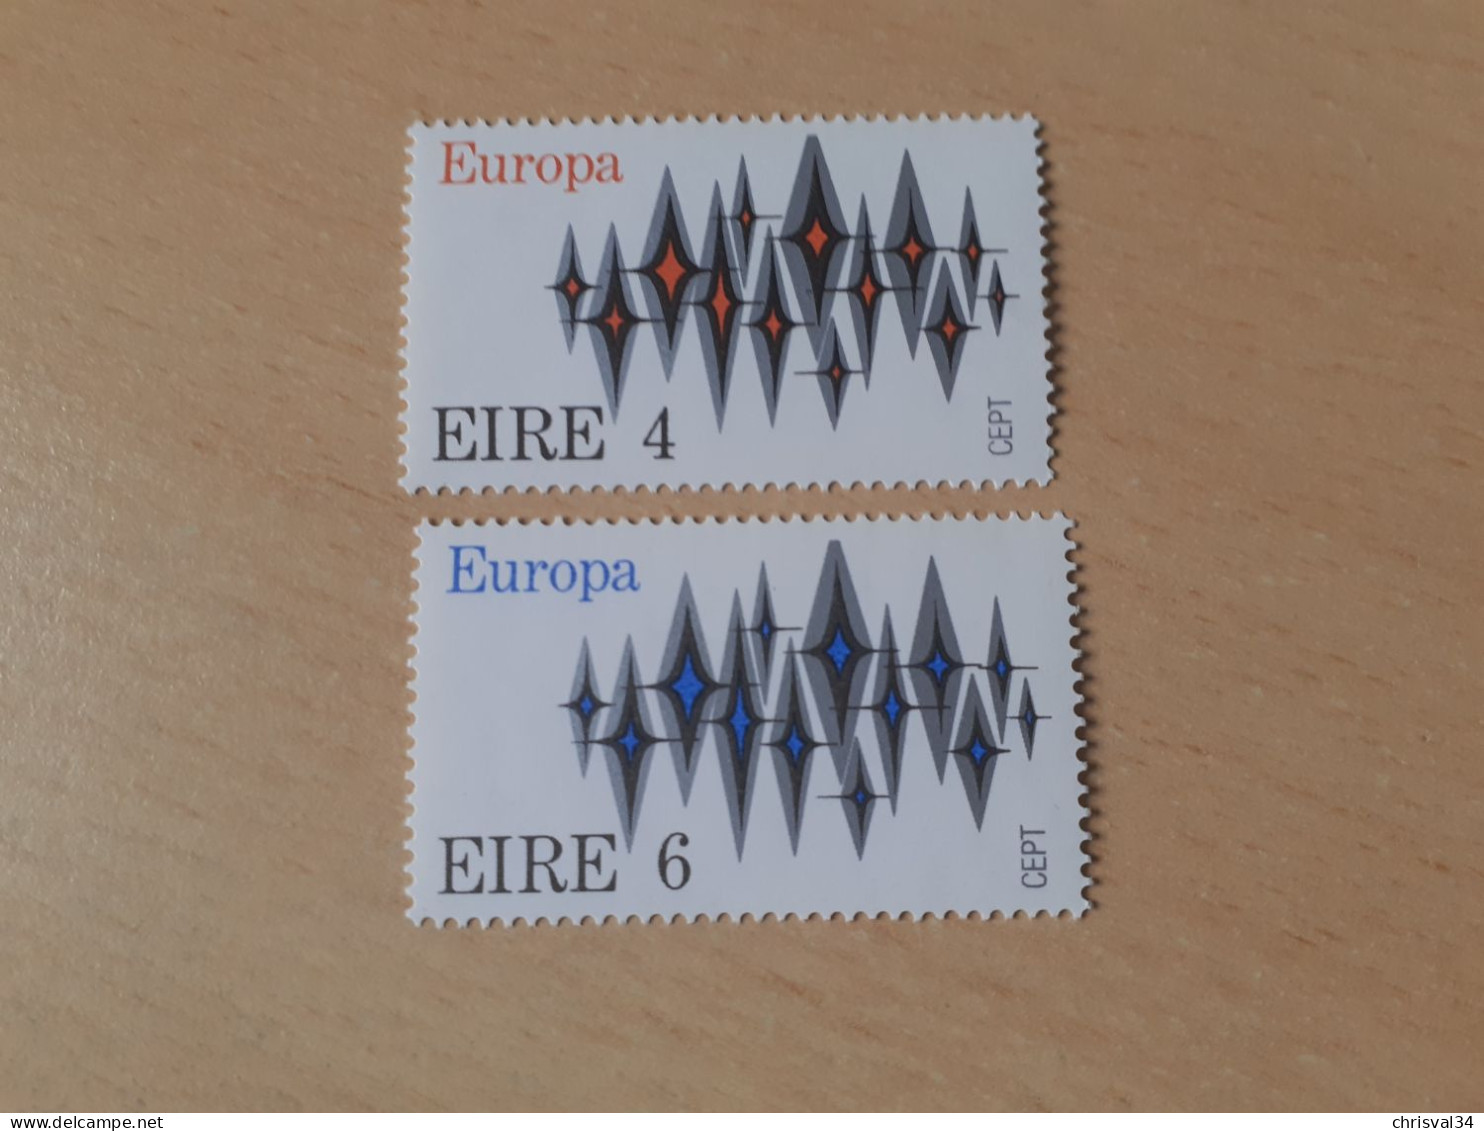 TIMBRES   IRLANDE   ANNEE   1972   N  278  /  279   COTE  20,00  EUROS   NEUFS  LUXE** - Unused Stamps